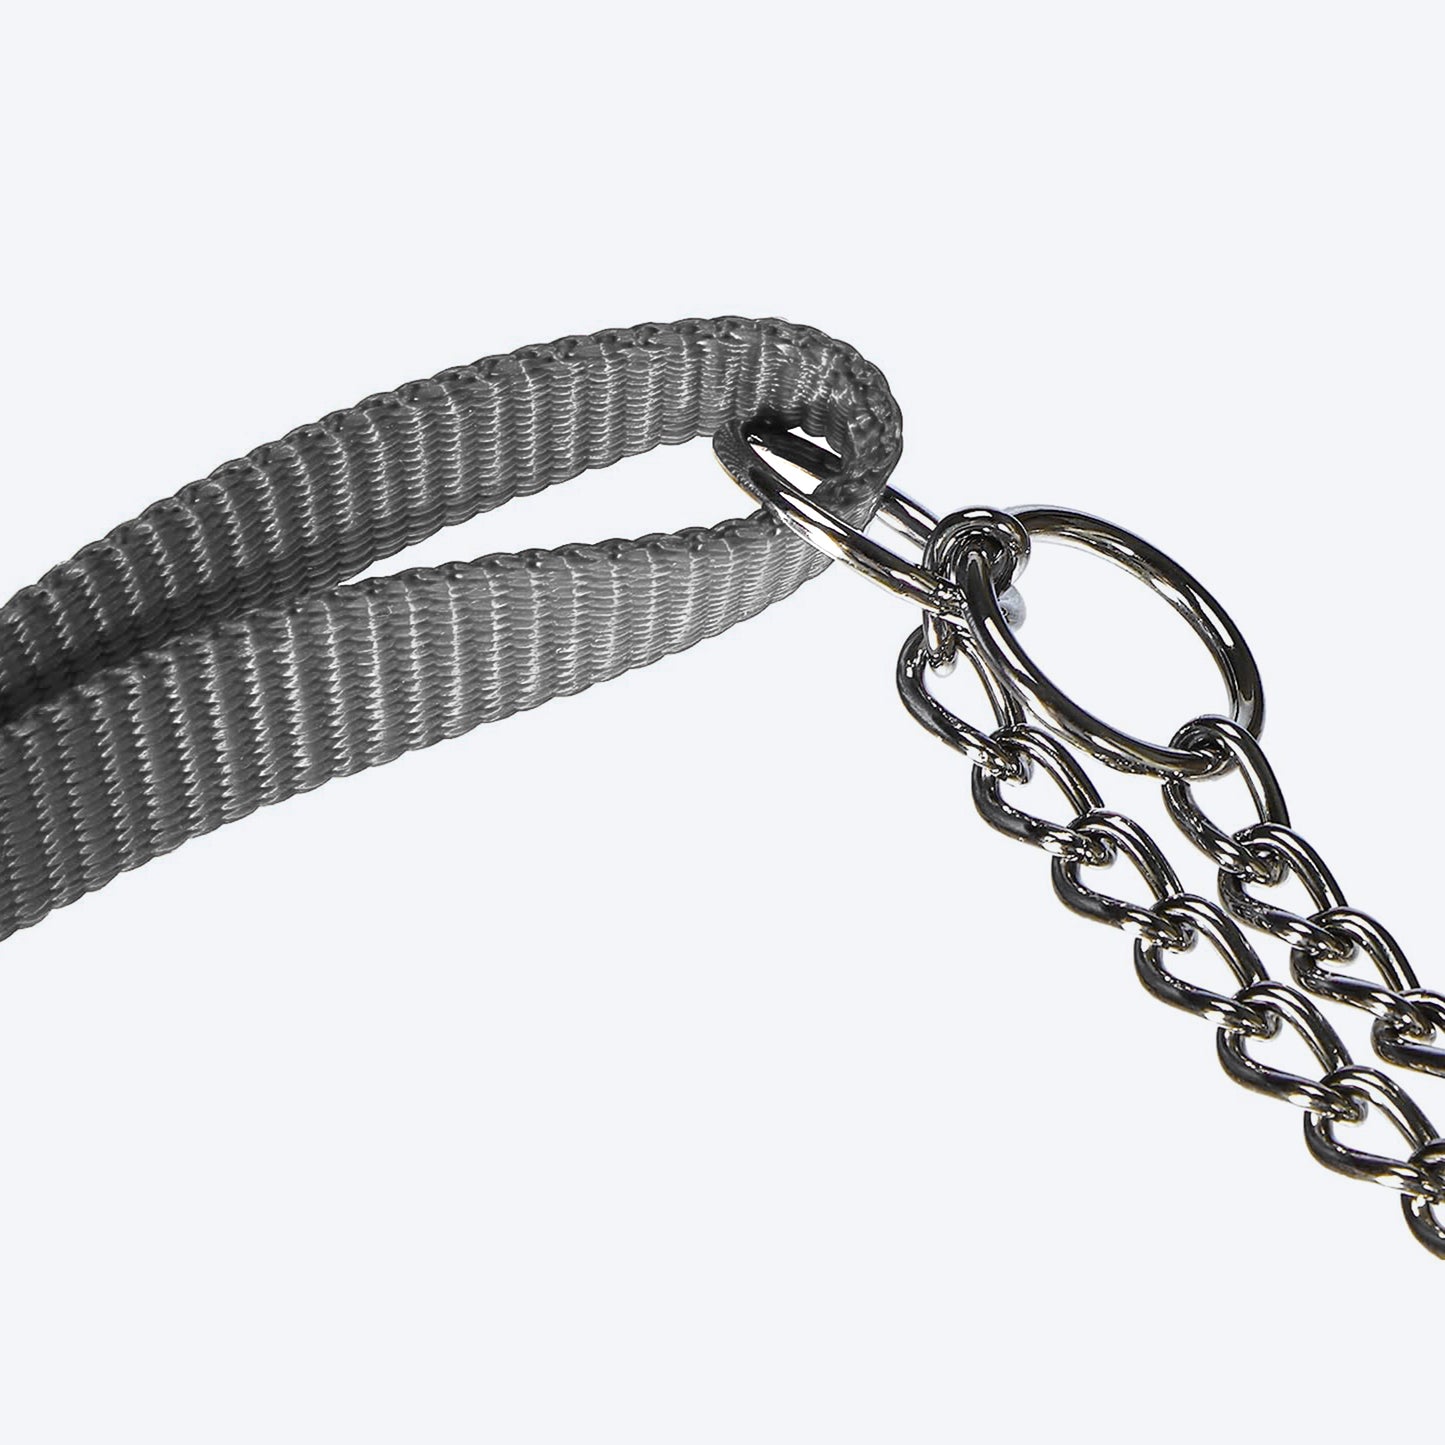 Trixie Premium Stop-The-Pull Collar - Graphite - Heads Up For Tails